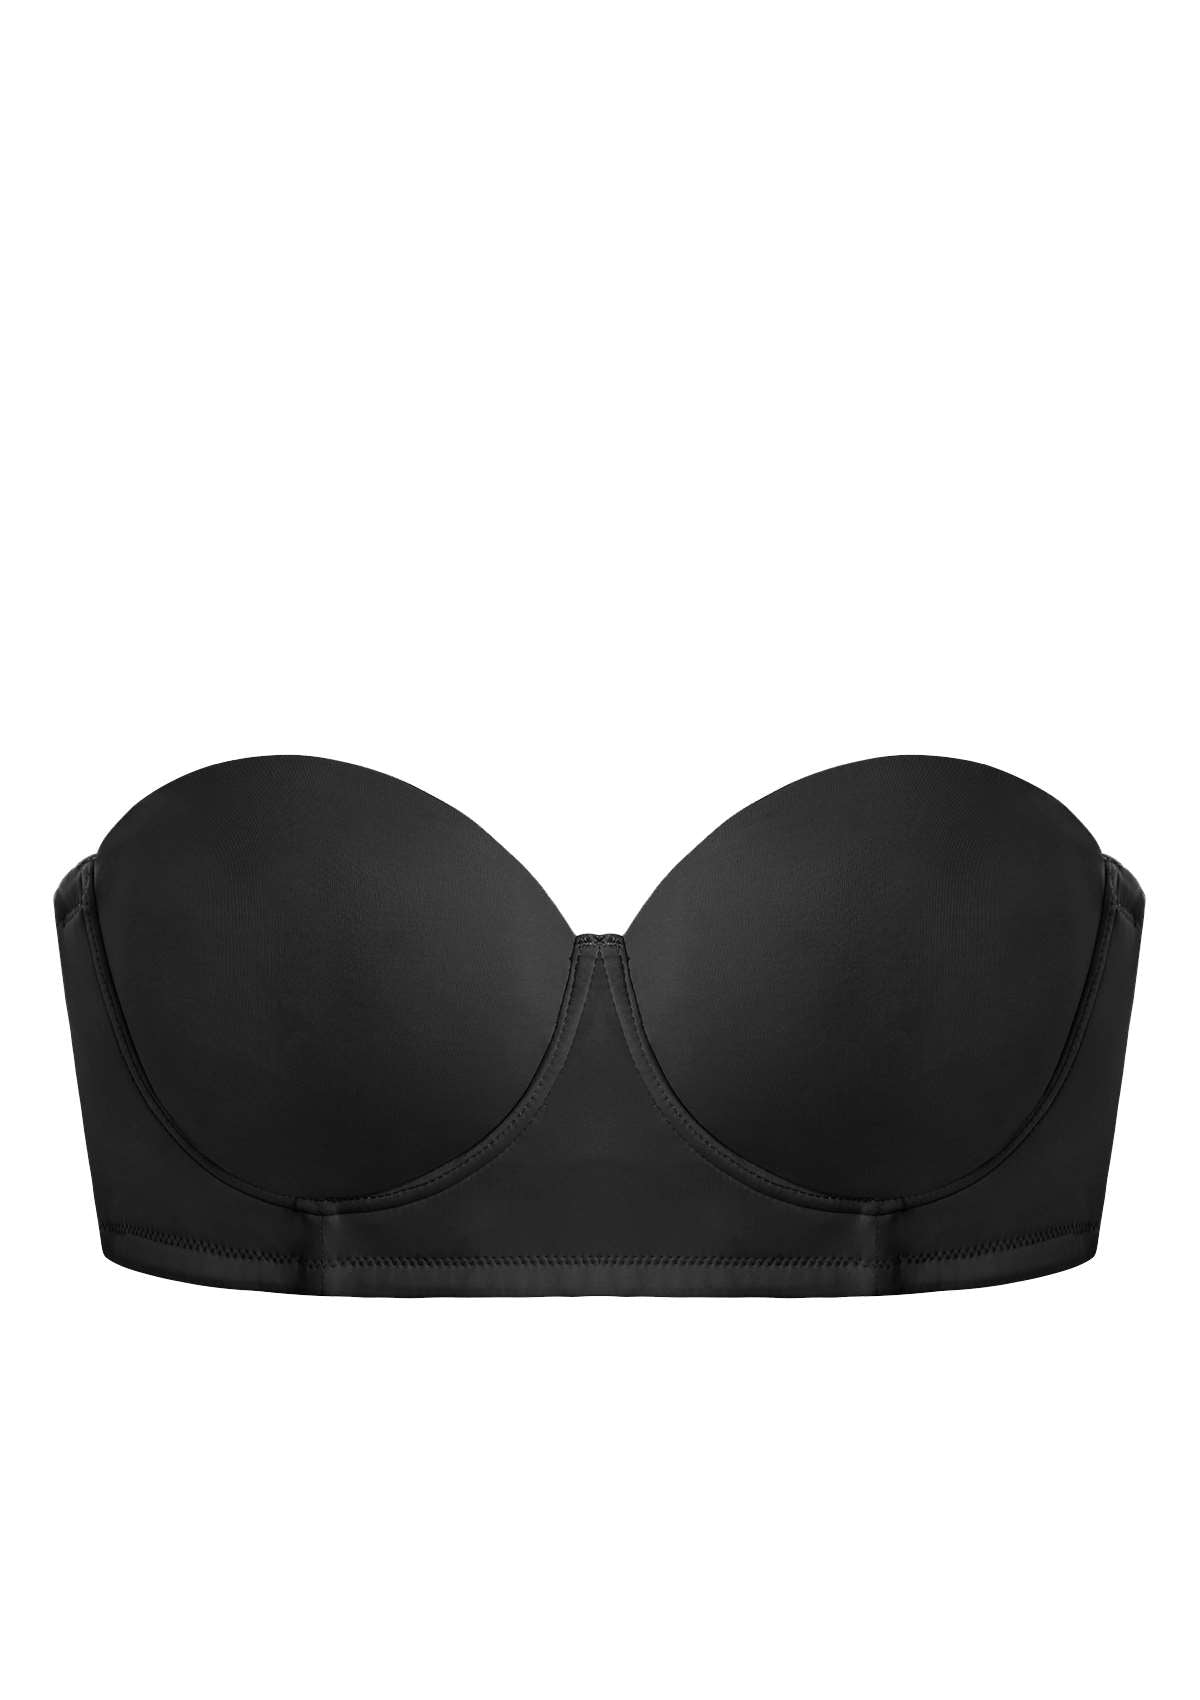 HSIA Margaret Molded Convertible Multiway Classic Strapless Bra - Black / 44 / D